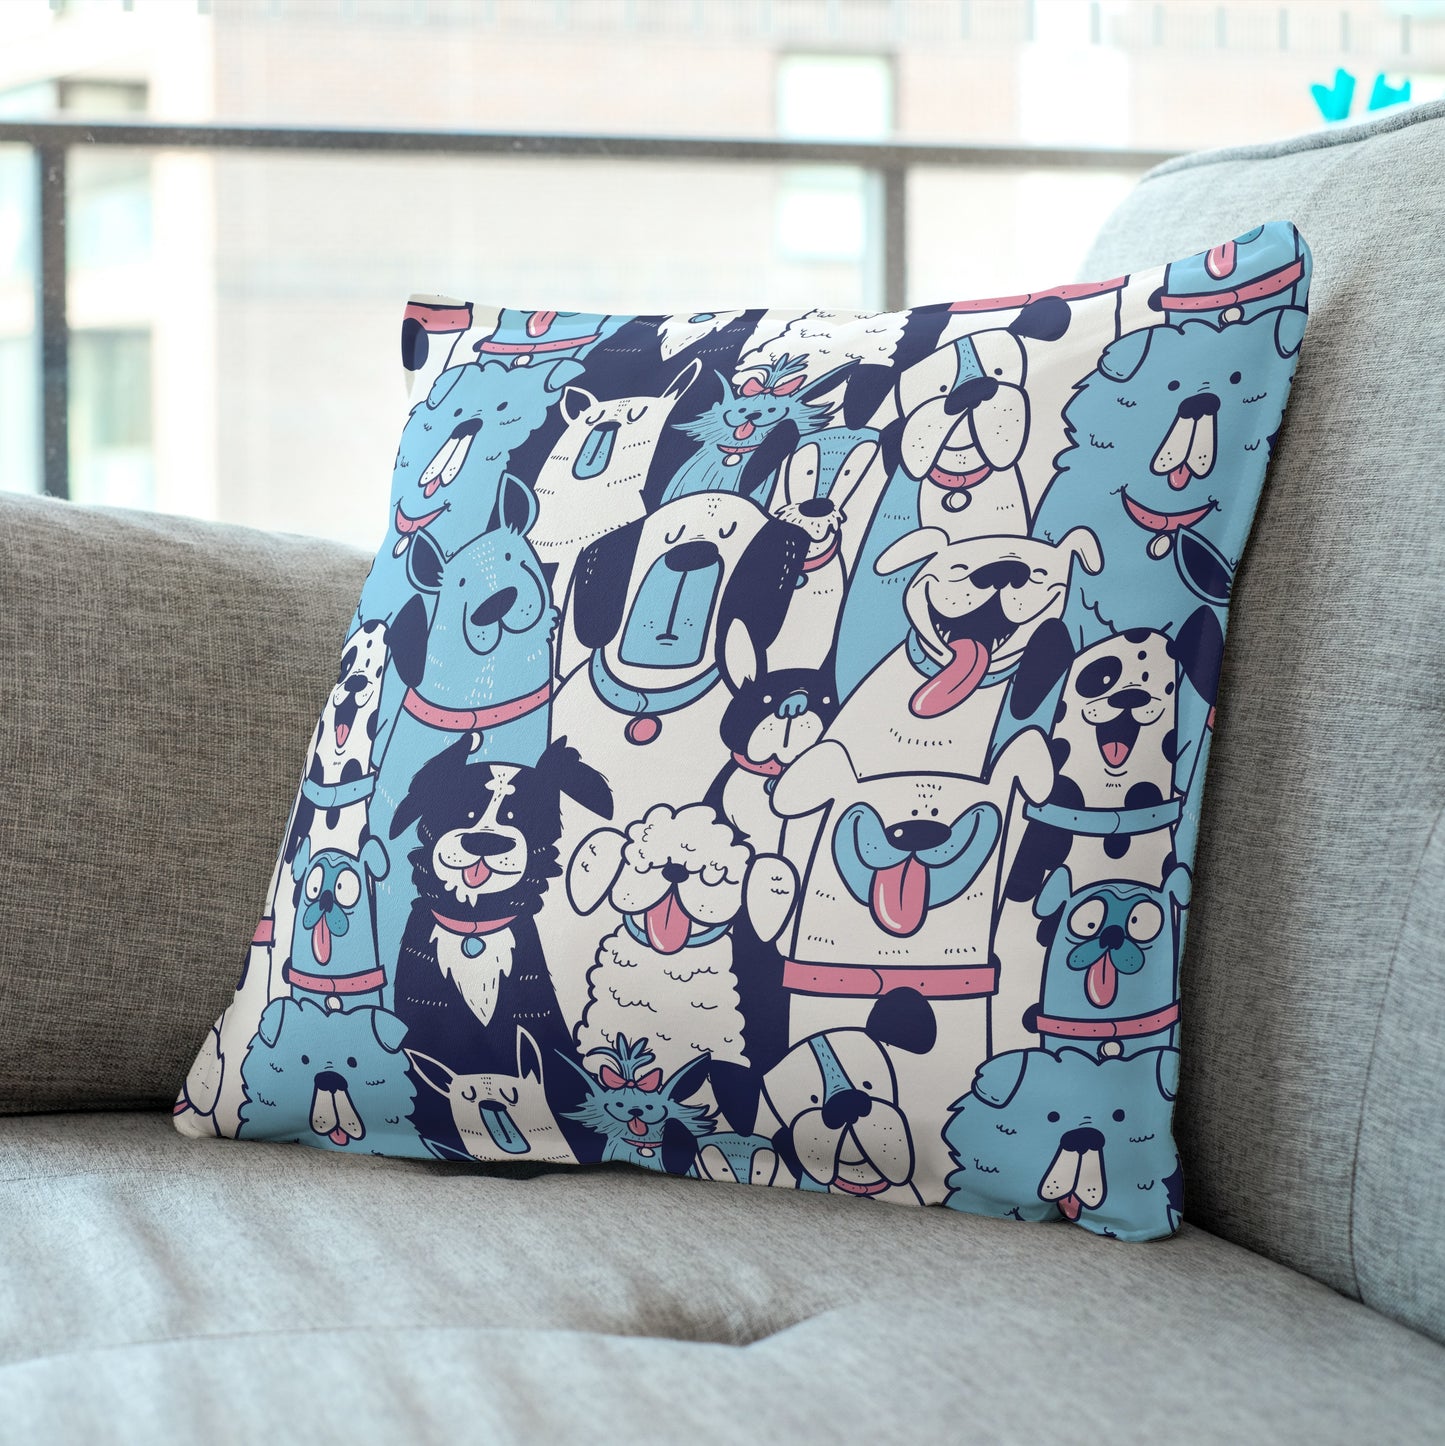 Blue Cushion Cover (Cover & Cushion Both Included)